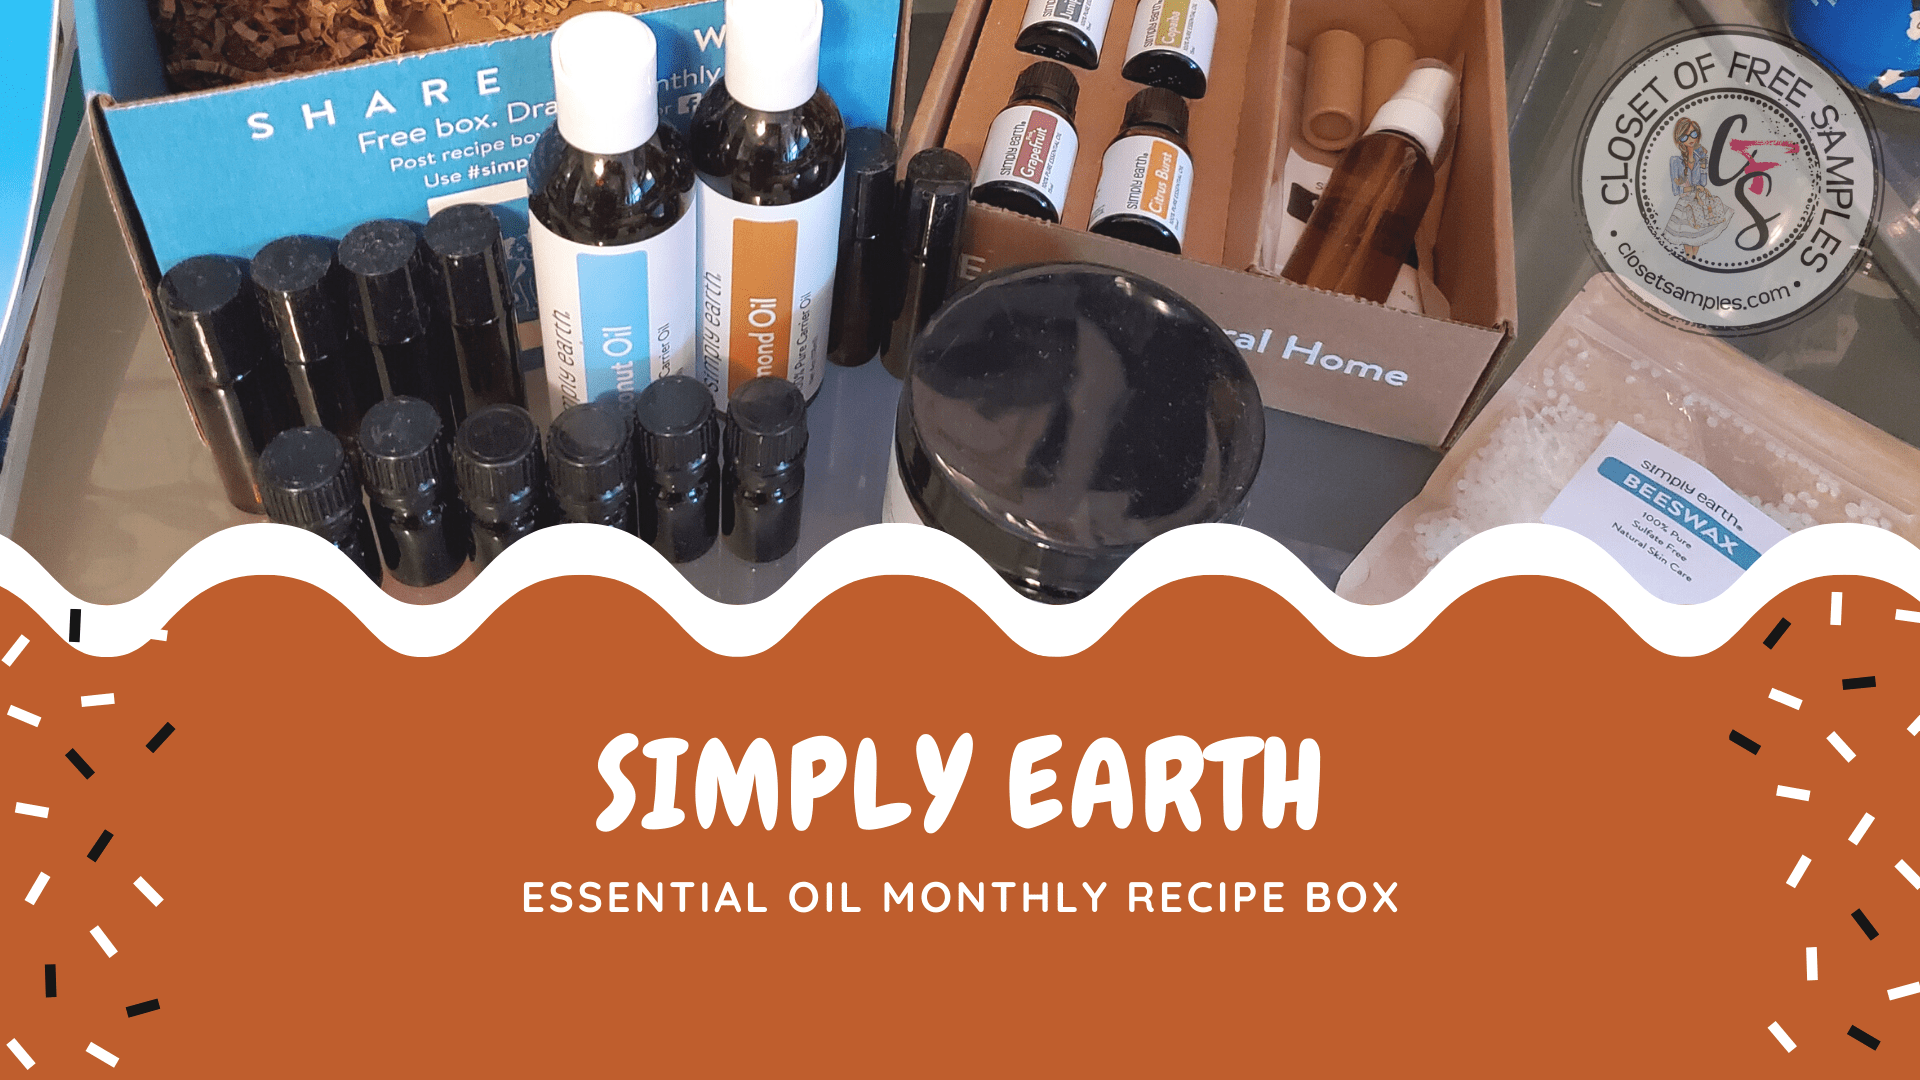 Simply-Earth-Essential-Oil-Monthly-Recipe-Box-Review-Closetsamples.png